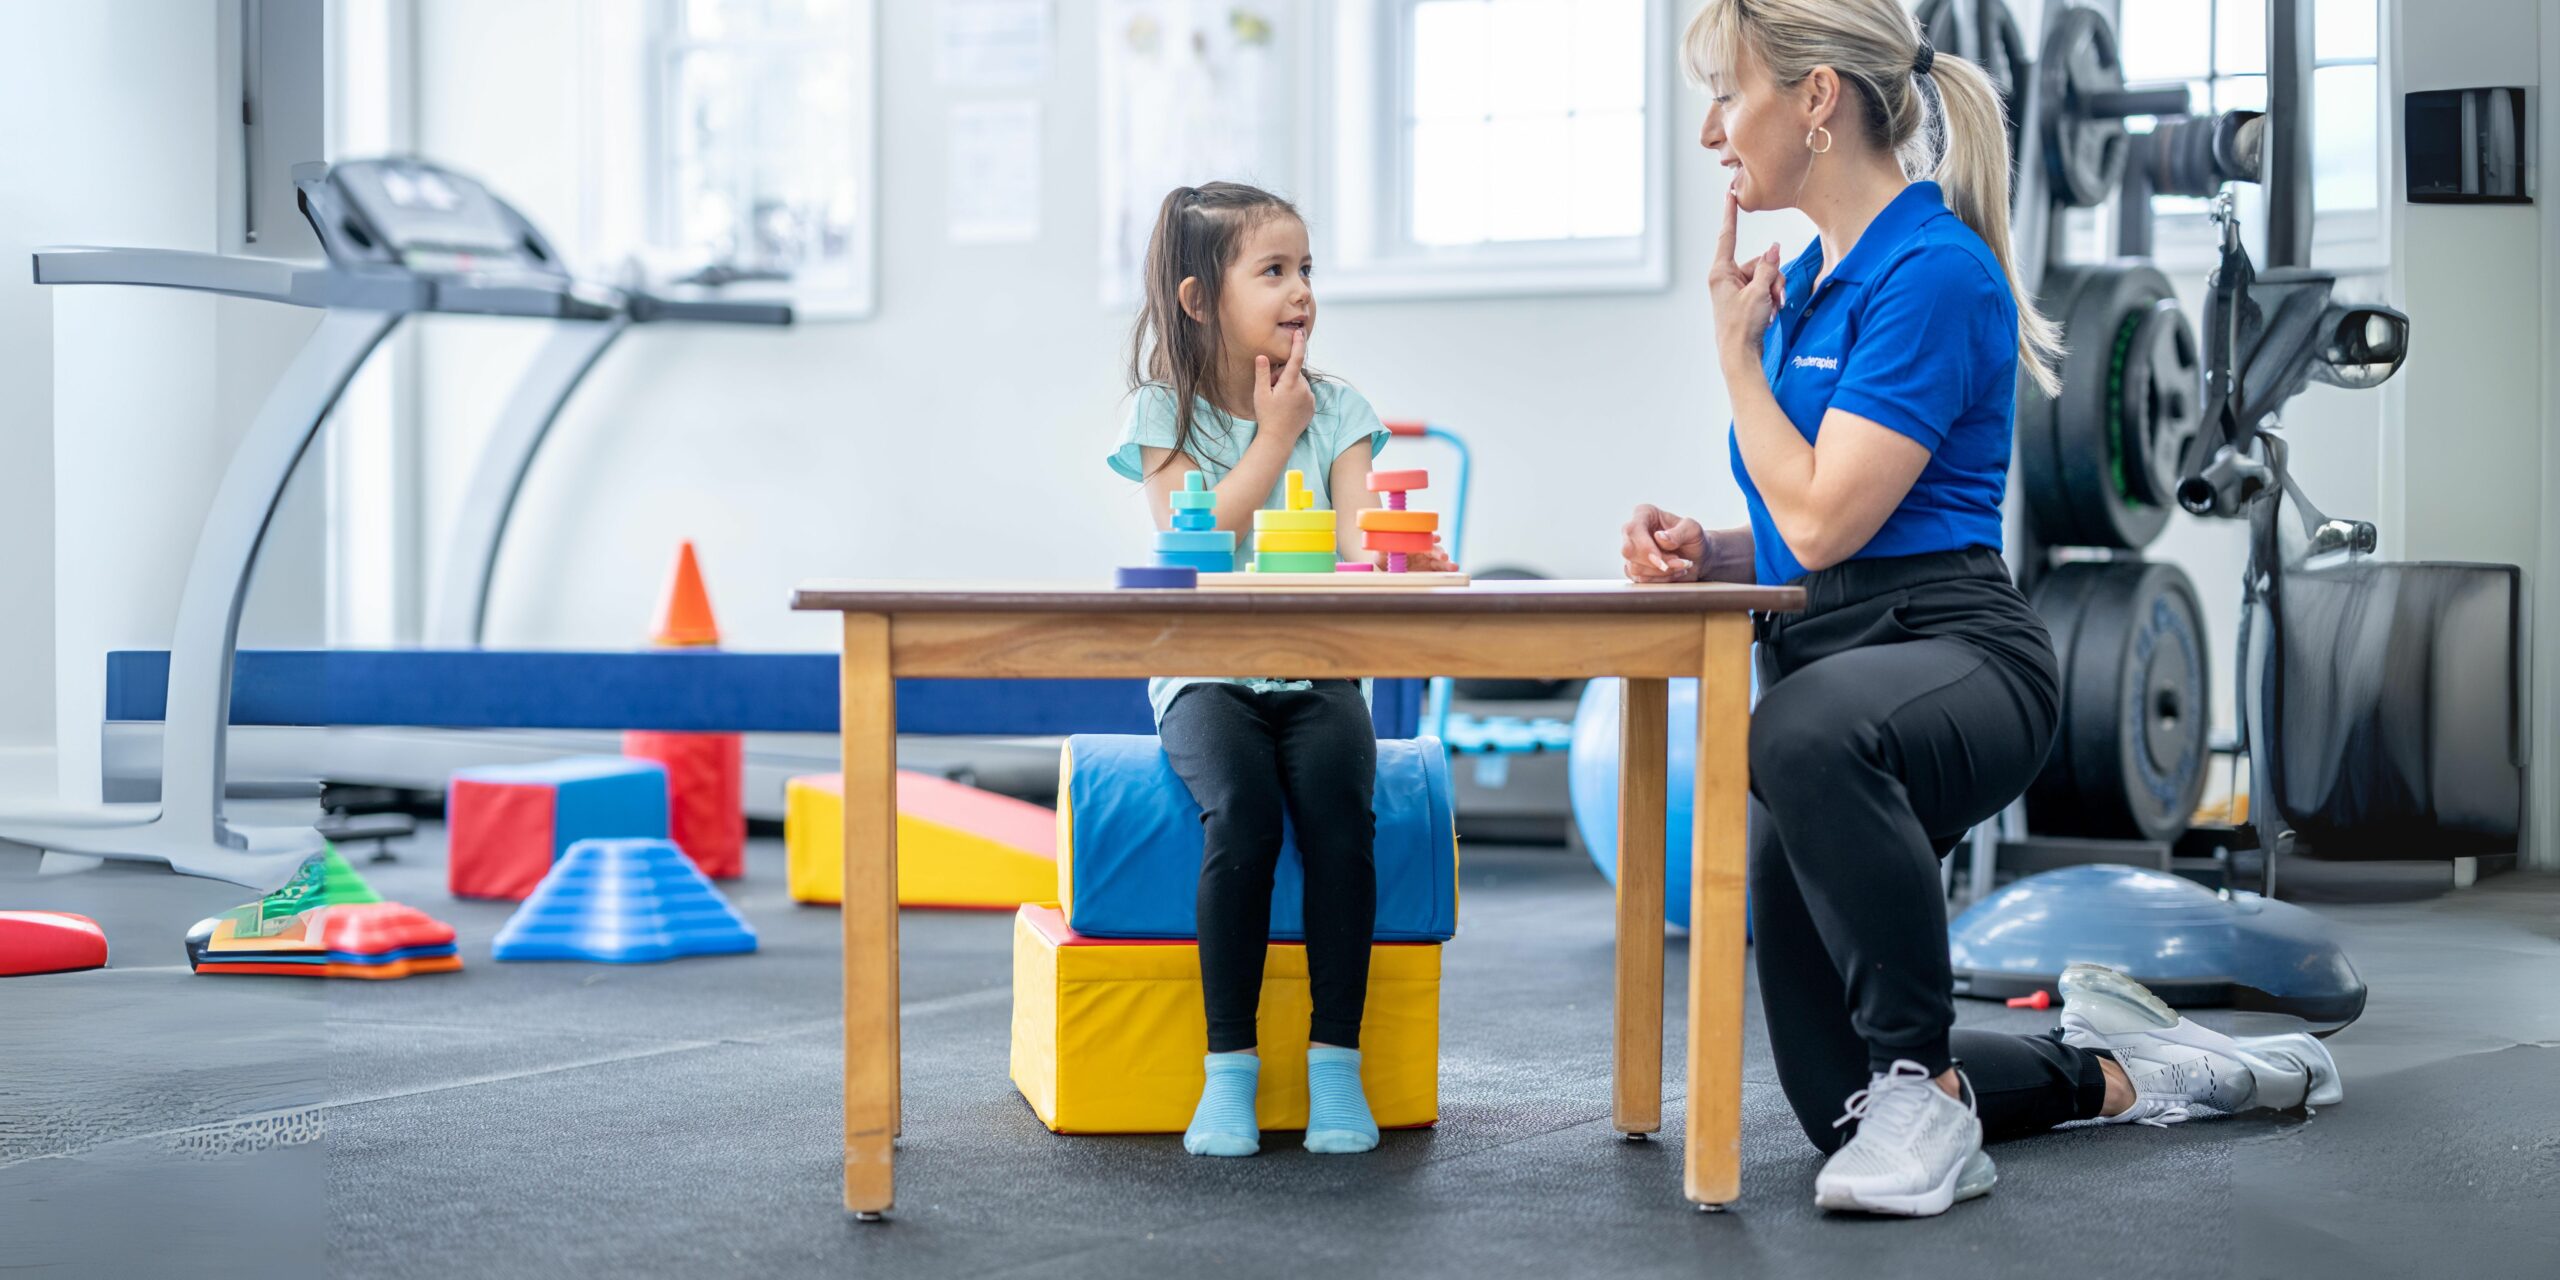 This image depicts a speech therapist engaging with a child during a session designed to enhance speech and language skills for developmental purposes.